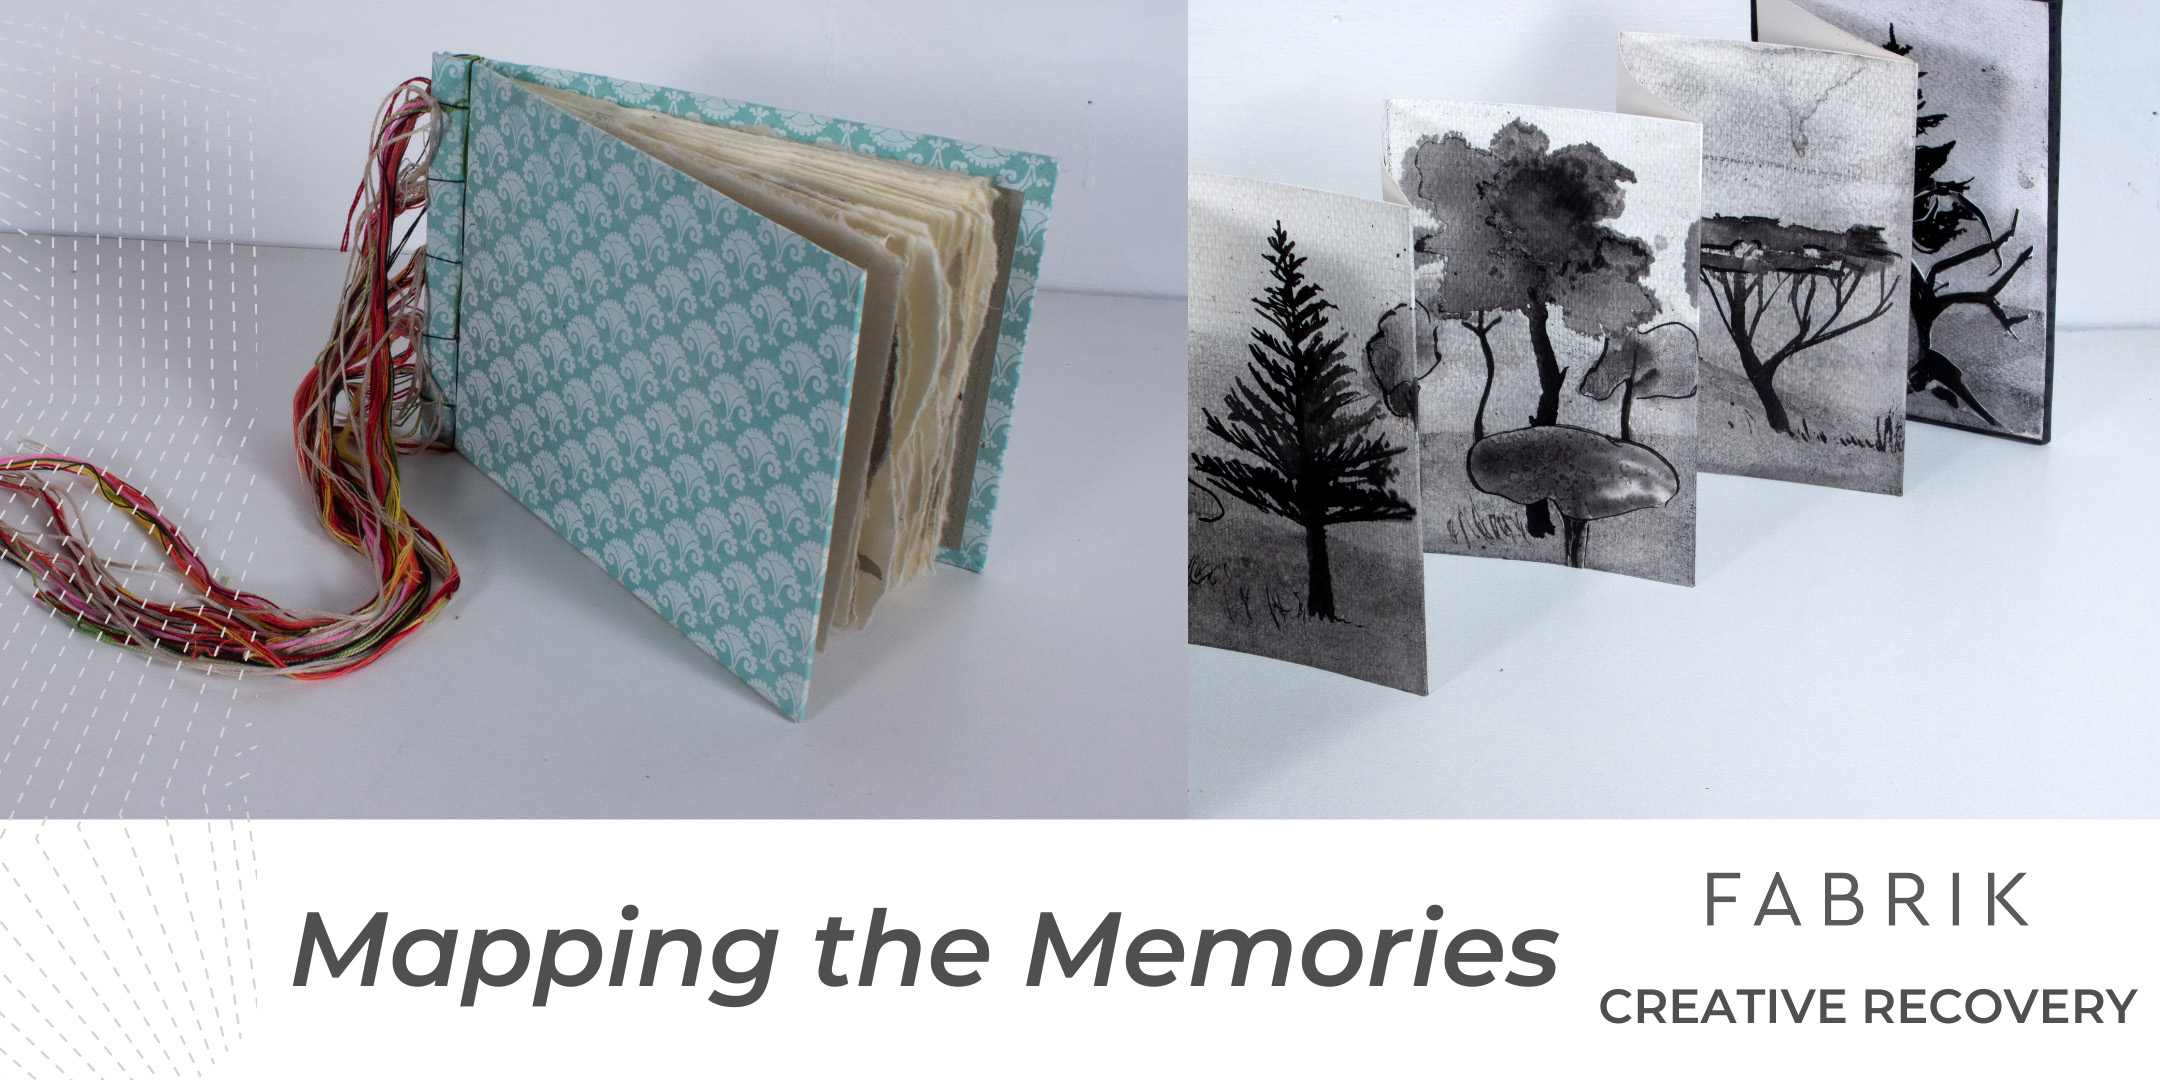 Image shows two photos. One has a blue stitched album, the other has a series of drawings. At the bottom text reads Mapping the Memories Fabrik Creative Recovery